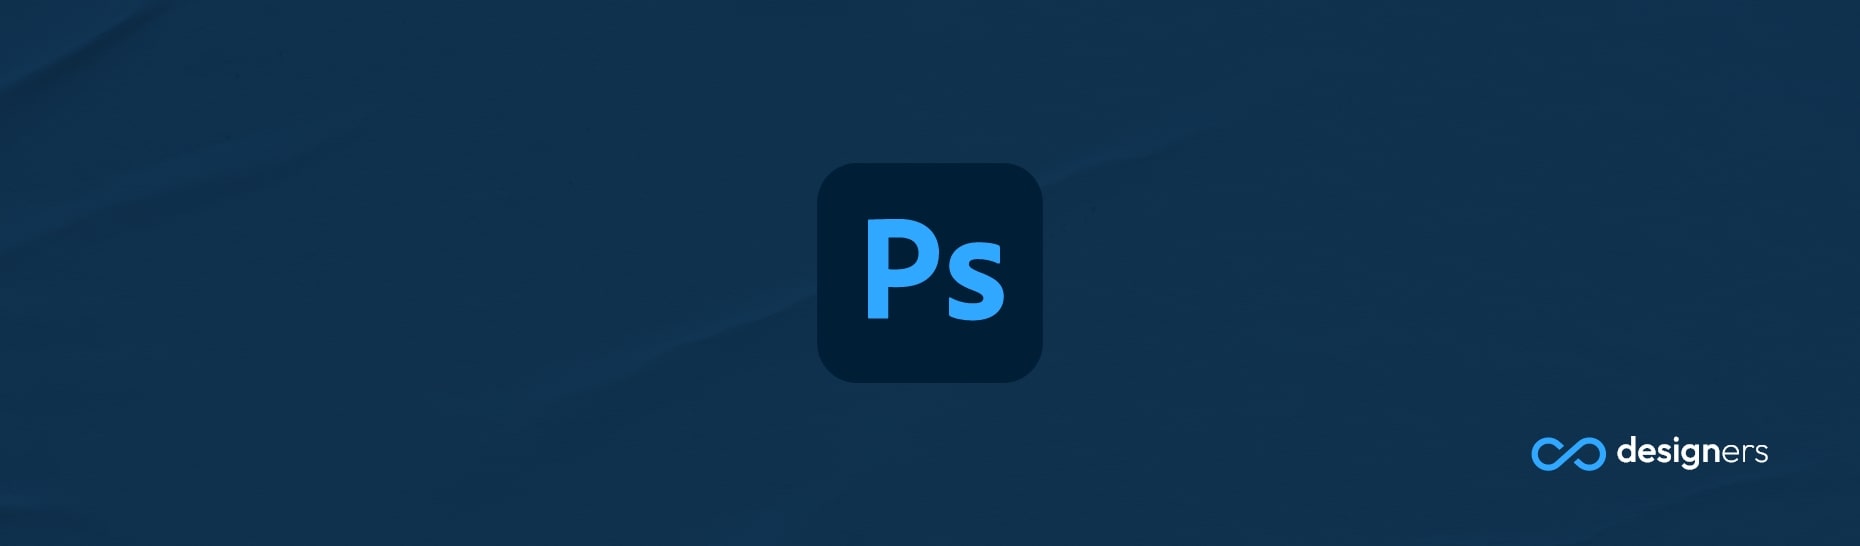 What Is the Opposite of CTRL Z in Photoshop?